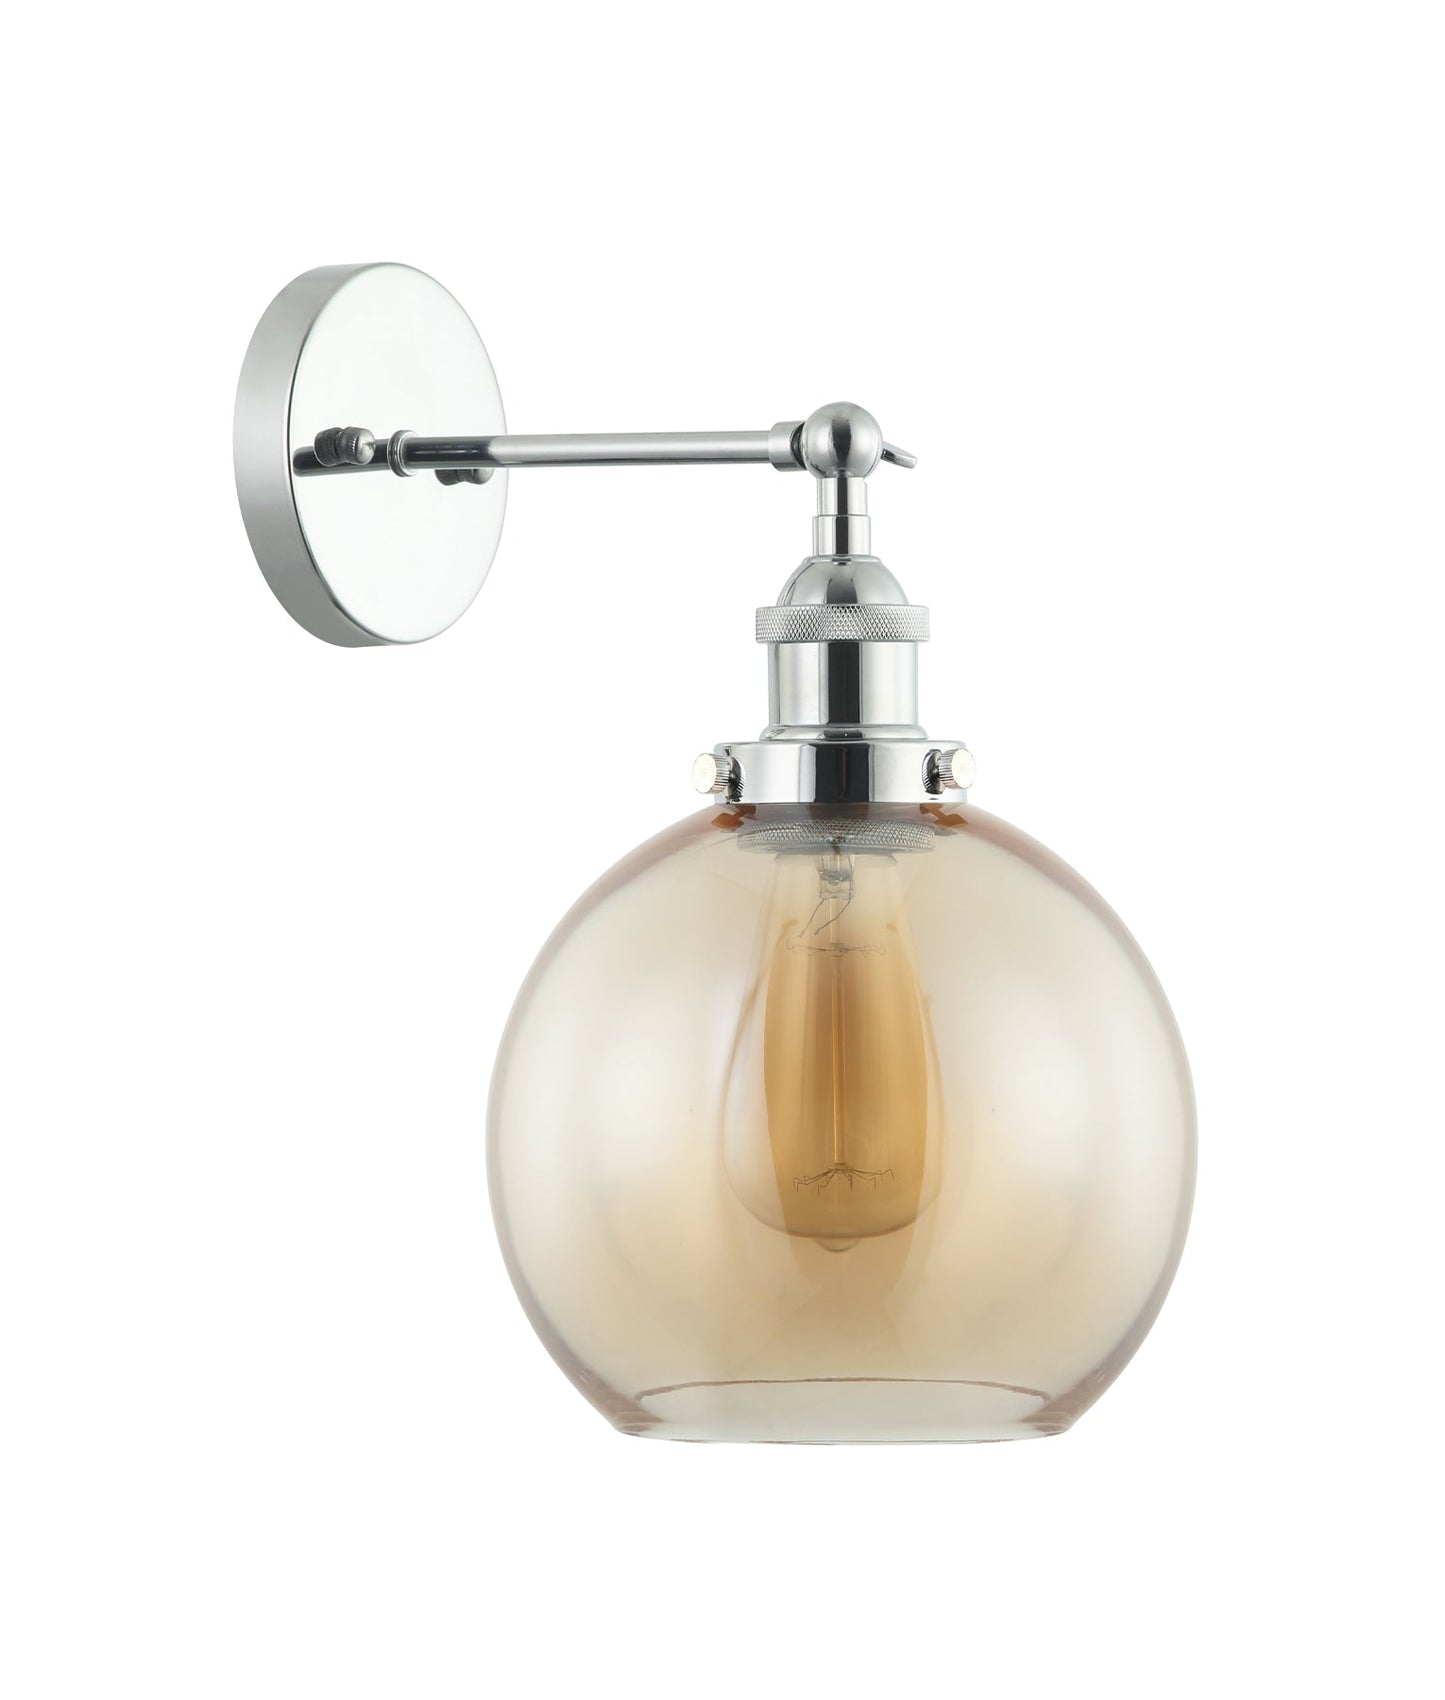 PESINI: Interior Swing Arm Glass with Antique Brass/ Chrome Highlight Wall Lights